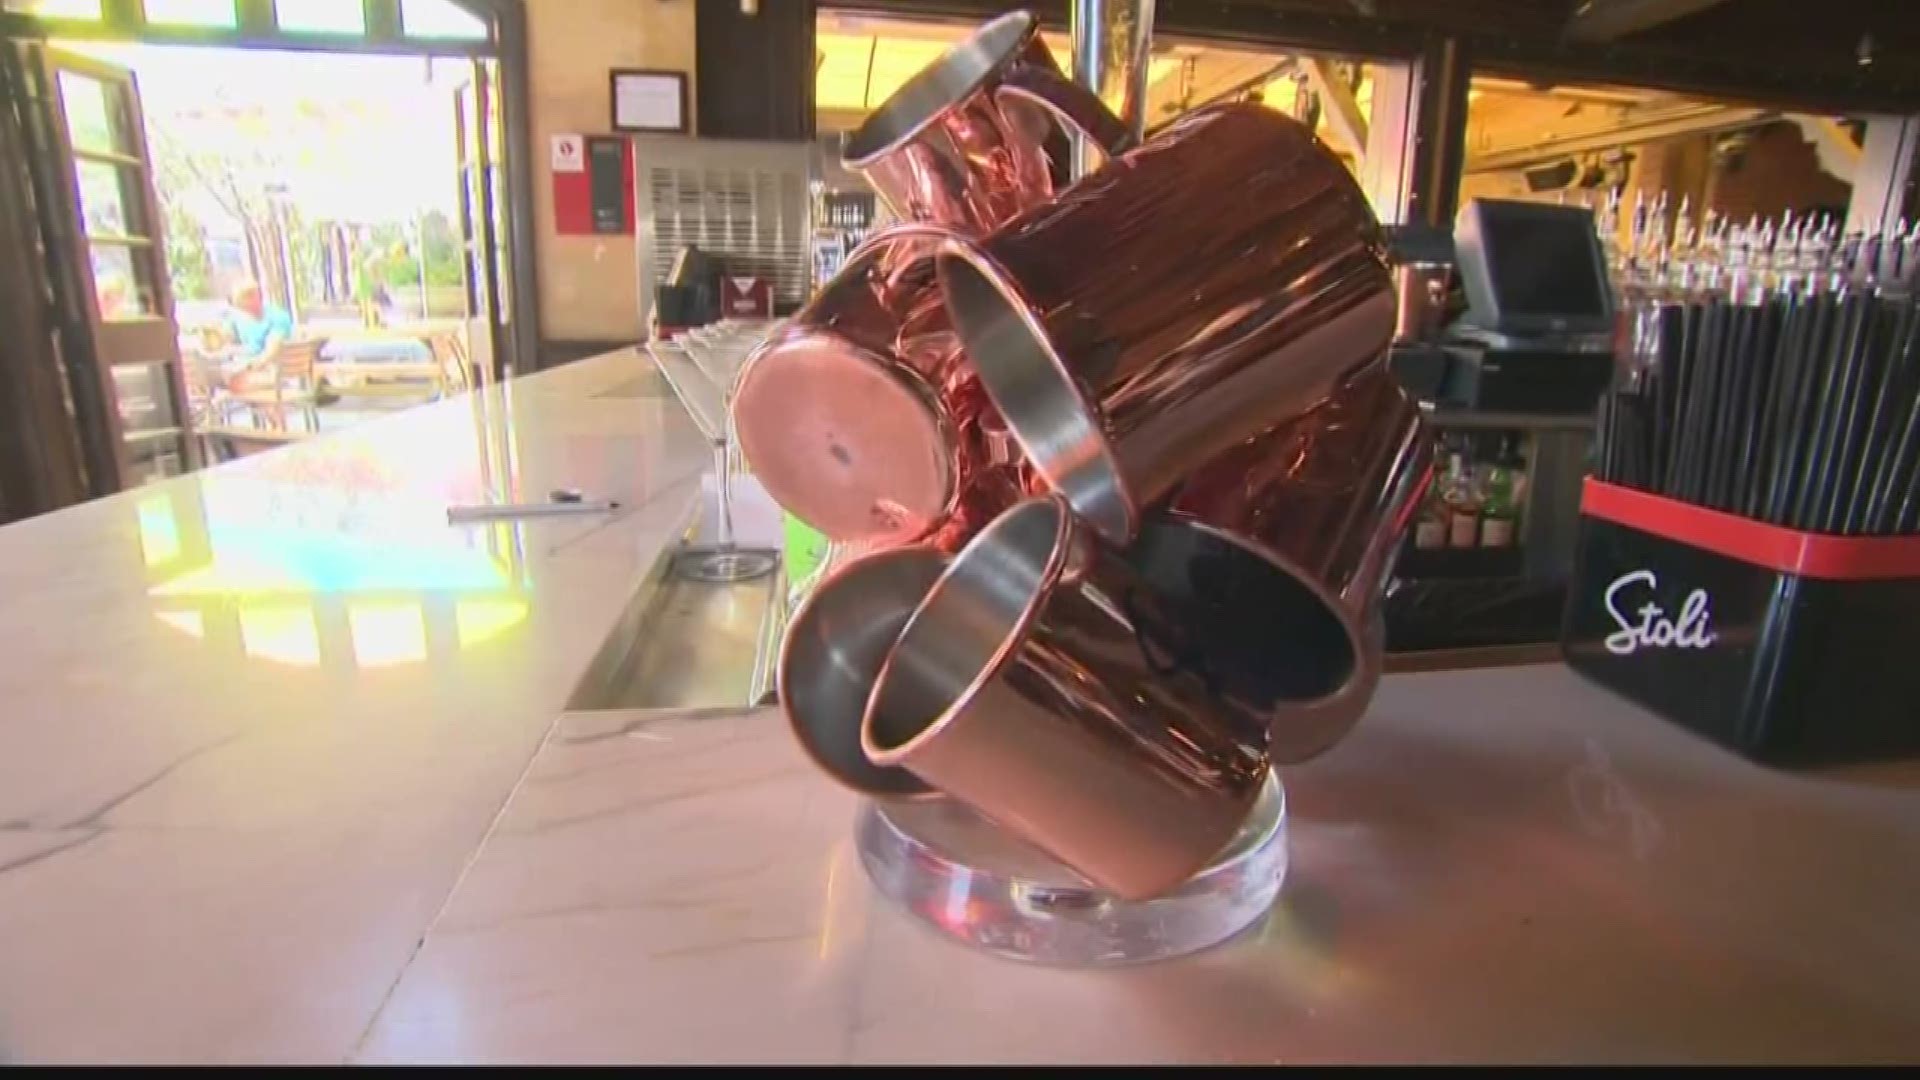 The Iowa Alcoholic Beverages Division claims drinking the popular beverage from a copper mug may be poisonous. We're seeing whether there's any truth to the claim.